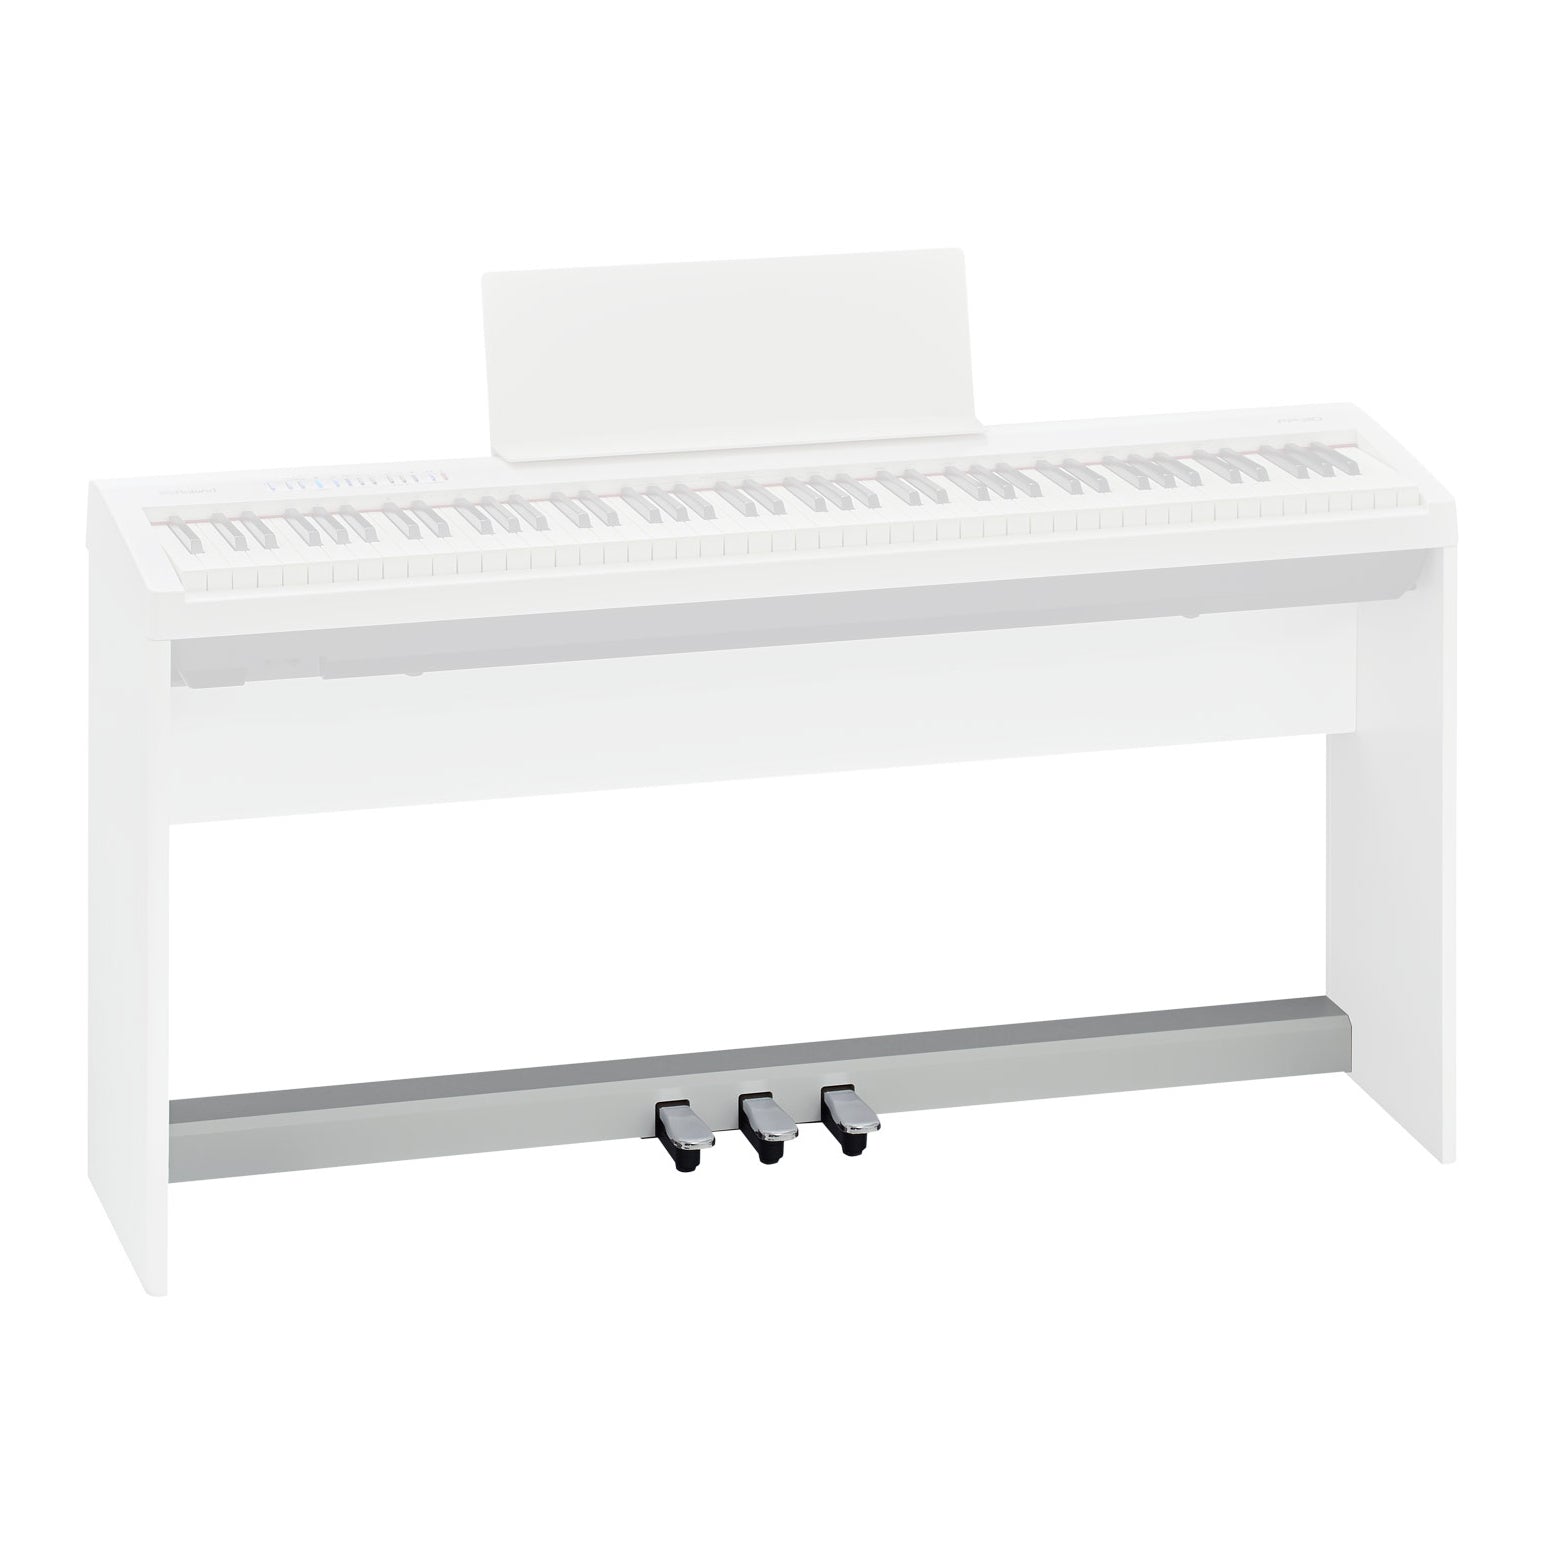 Roland KPD-70 Pedal Unit for the FP-30 and FP-30X Digital Piano - White